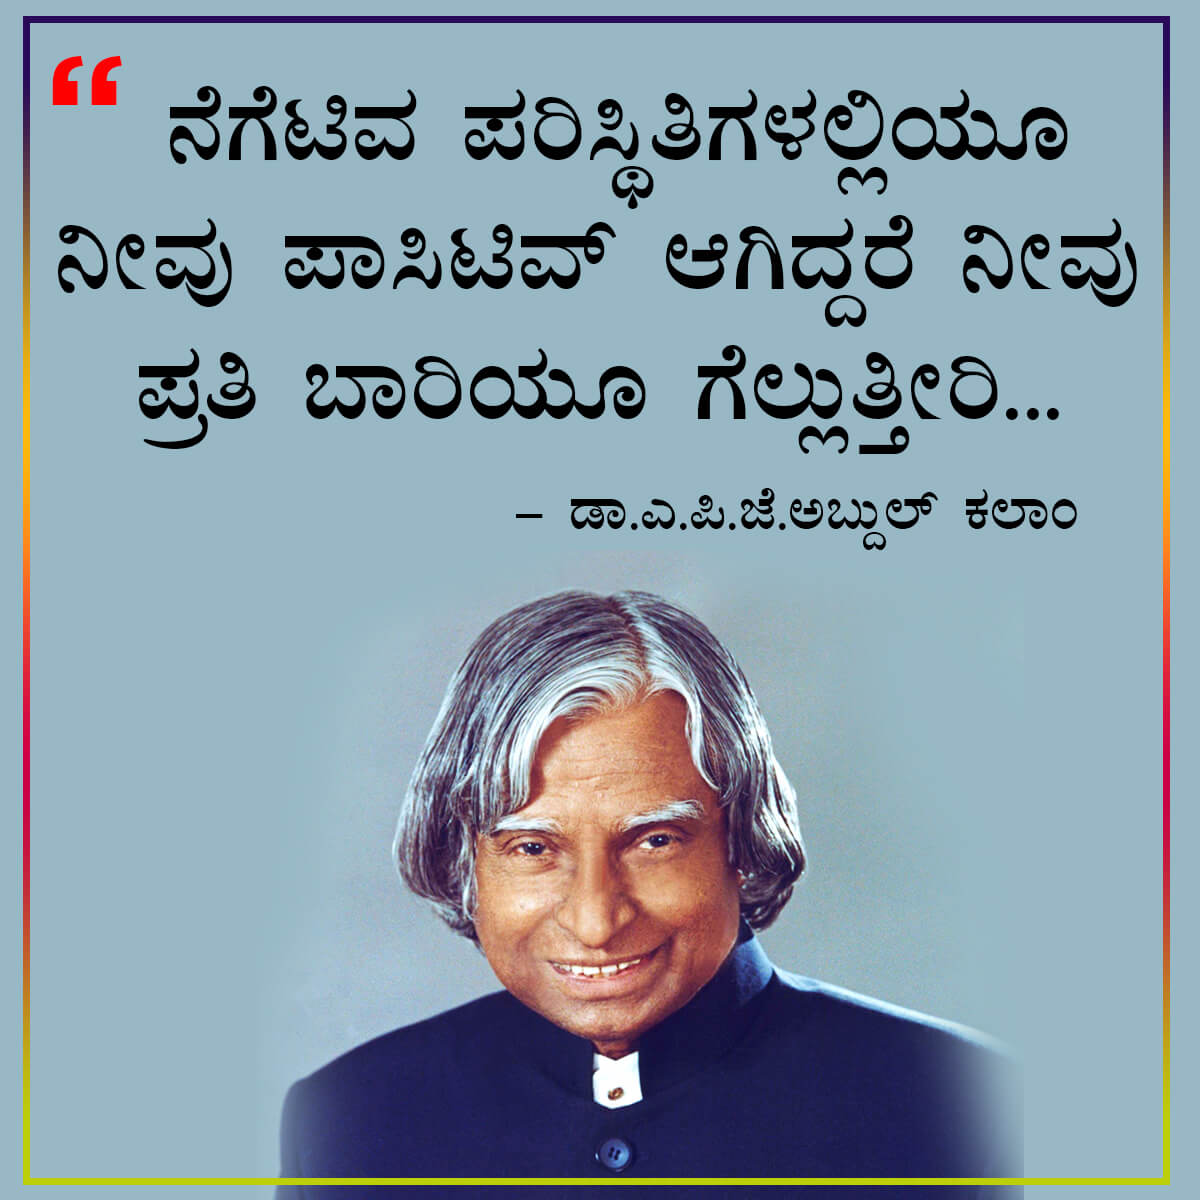 Best Quotes of Dr. A.P.J. Abdul Kalam in Kannada